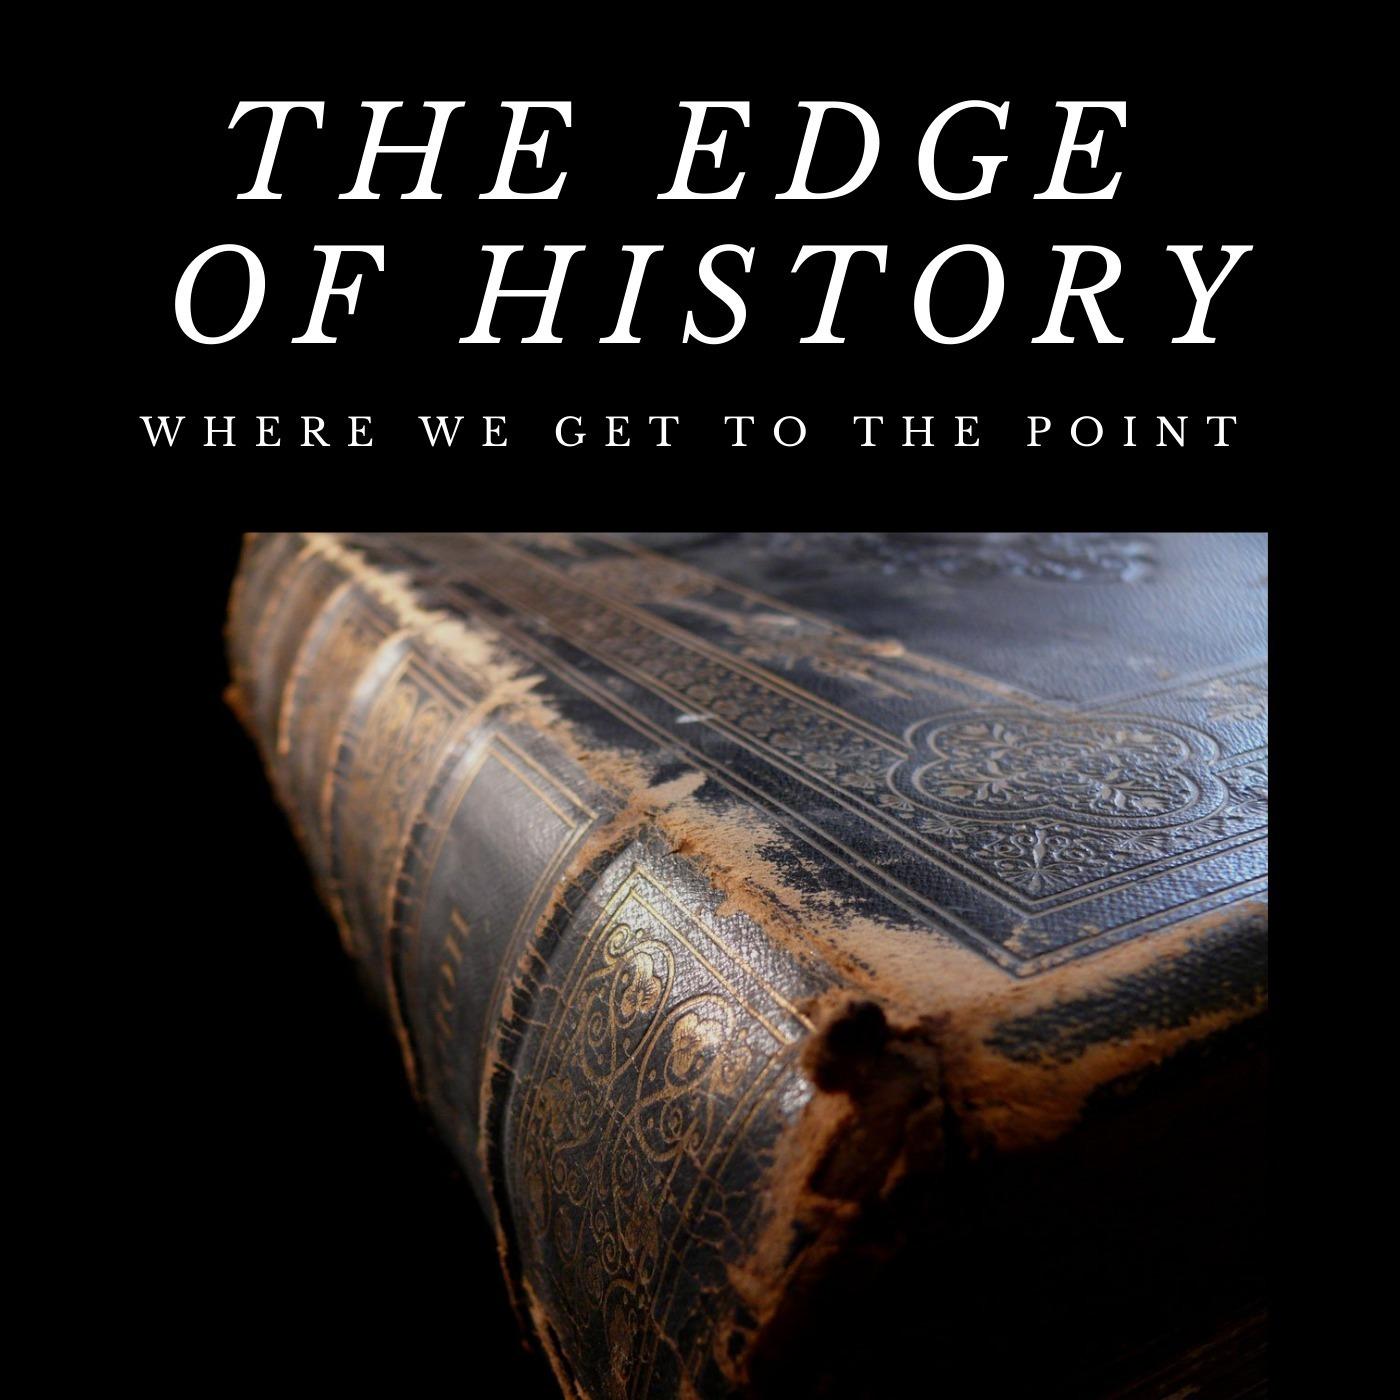 The Edge of History